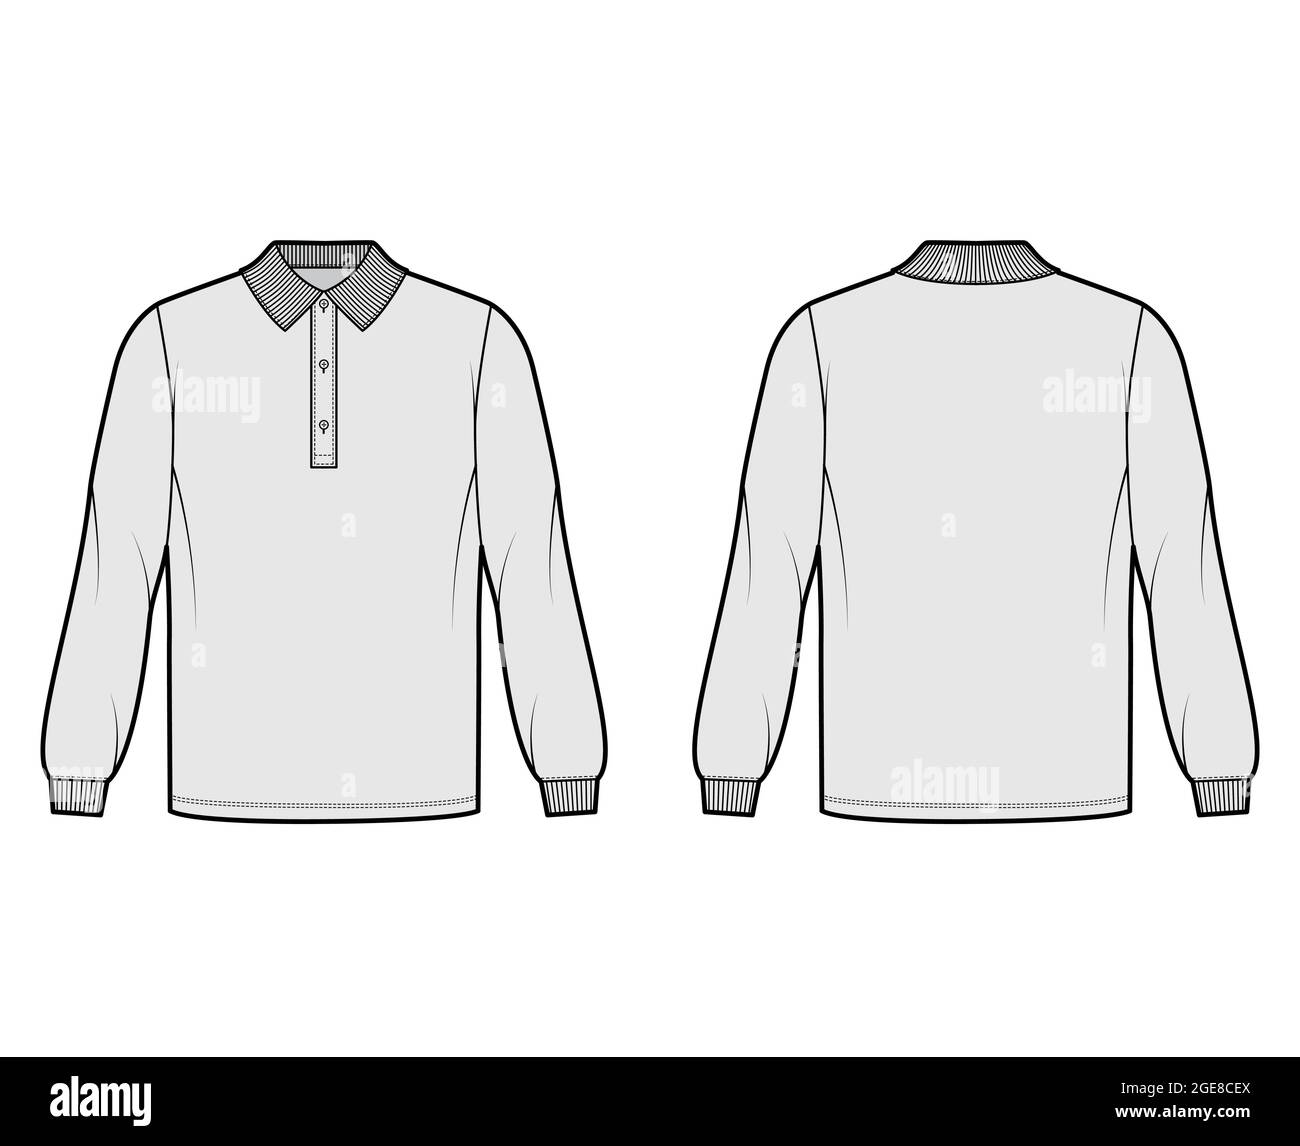 Shirt polo oversized technical fashion illustration with long sleeves ...